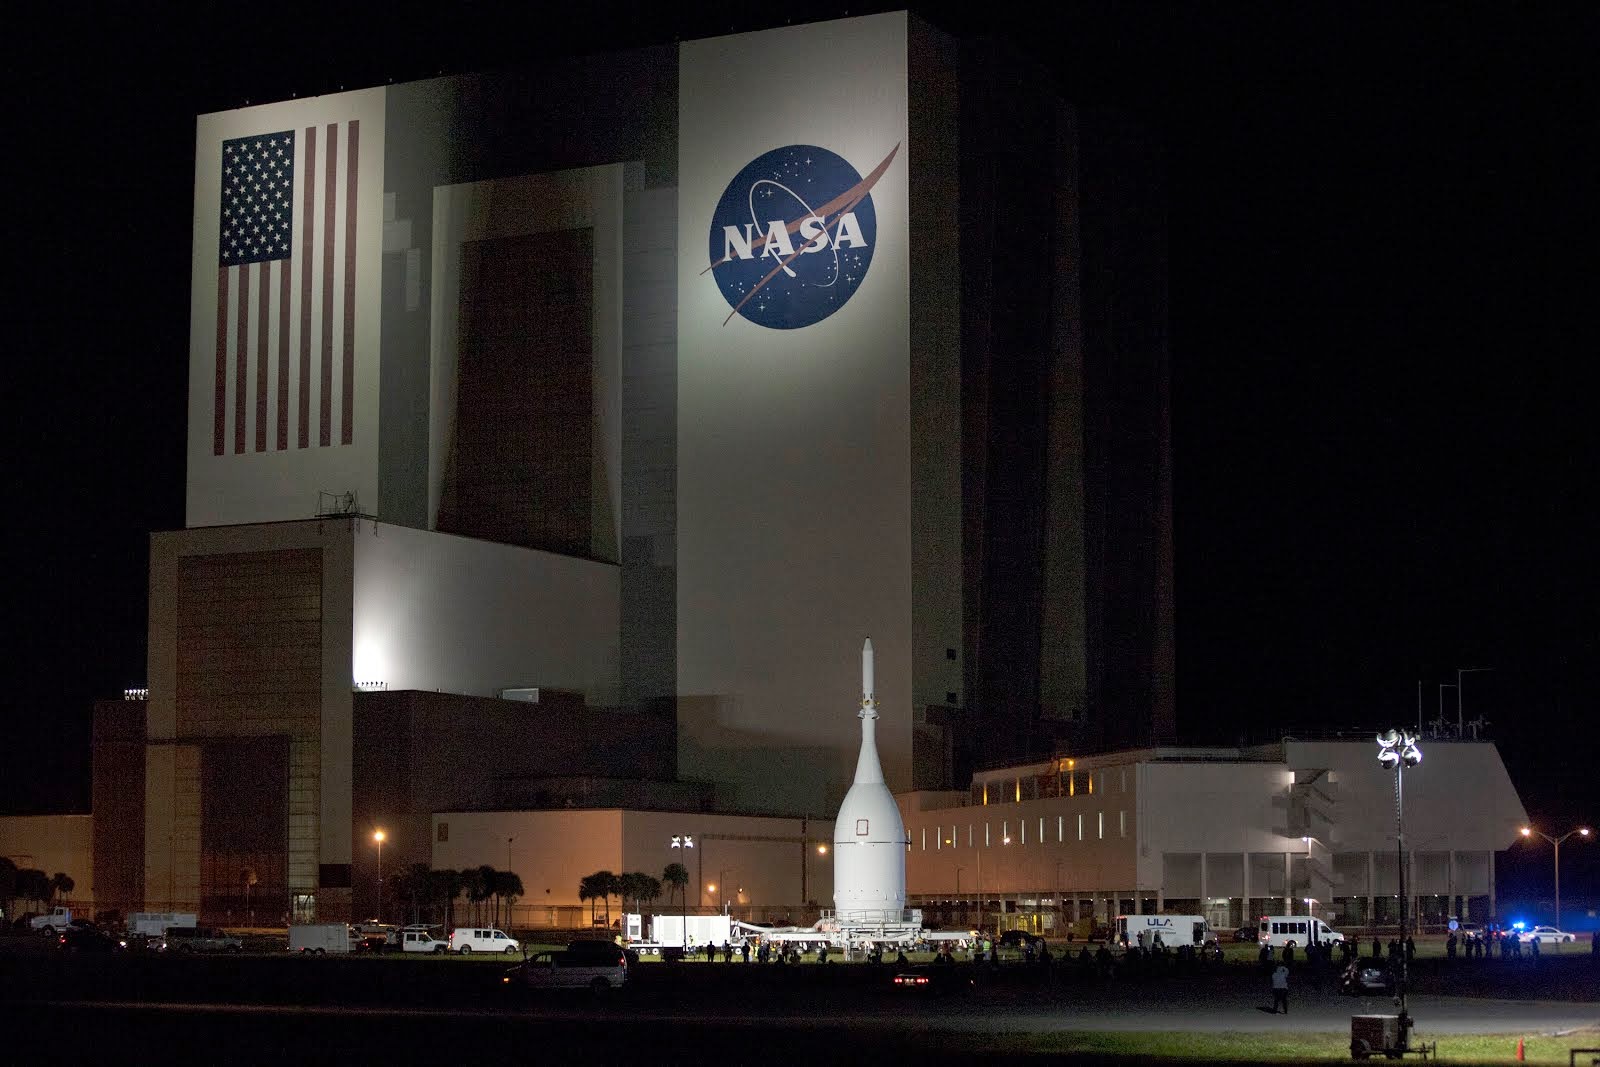 ORION PASSES SPACEPORT VEHICLE ASSEMBLY BUILDING